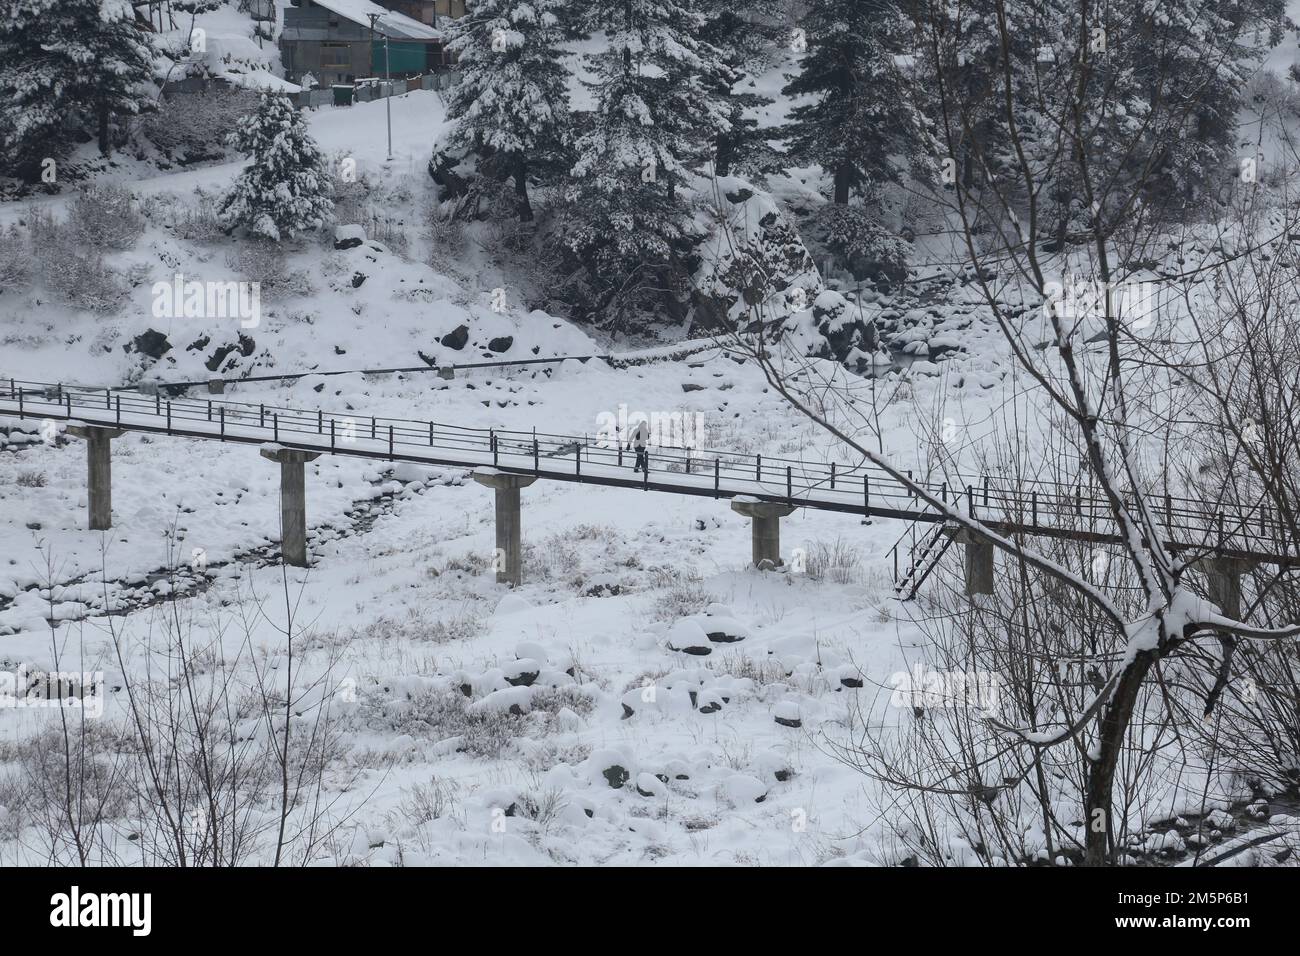 December 30, 2022, Srinagar, Jammu and Kashmir, India: Villagers walks on snow covered bridge after fresh snowfall in Tangmarg, some 40 kilimeters north of Srinagar, the summer capital of Indian Kashmir. Higher reaches of Kashmir experienced light to moderate snowfall and light rain lash plains. The spell has broken cycle of intense cold wave in the region. (Credit Image: © Sajad Hameed/Pacific Press via ZUMA Press Wire) Stock Photo